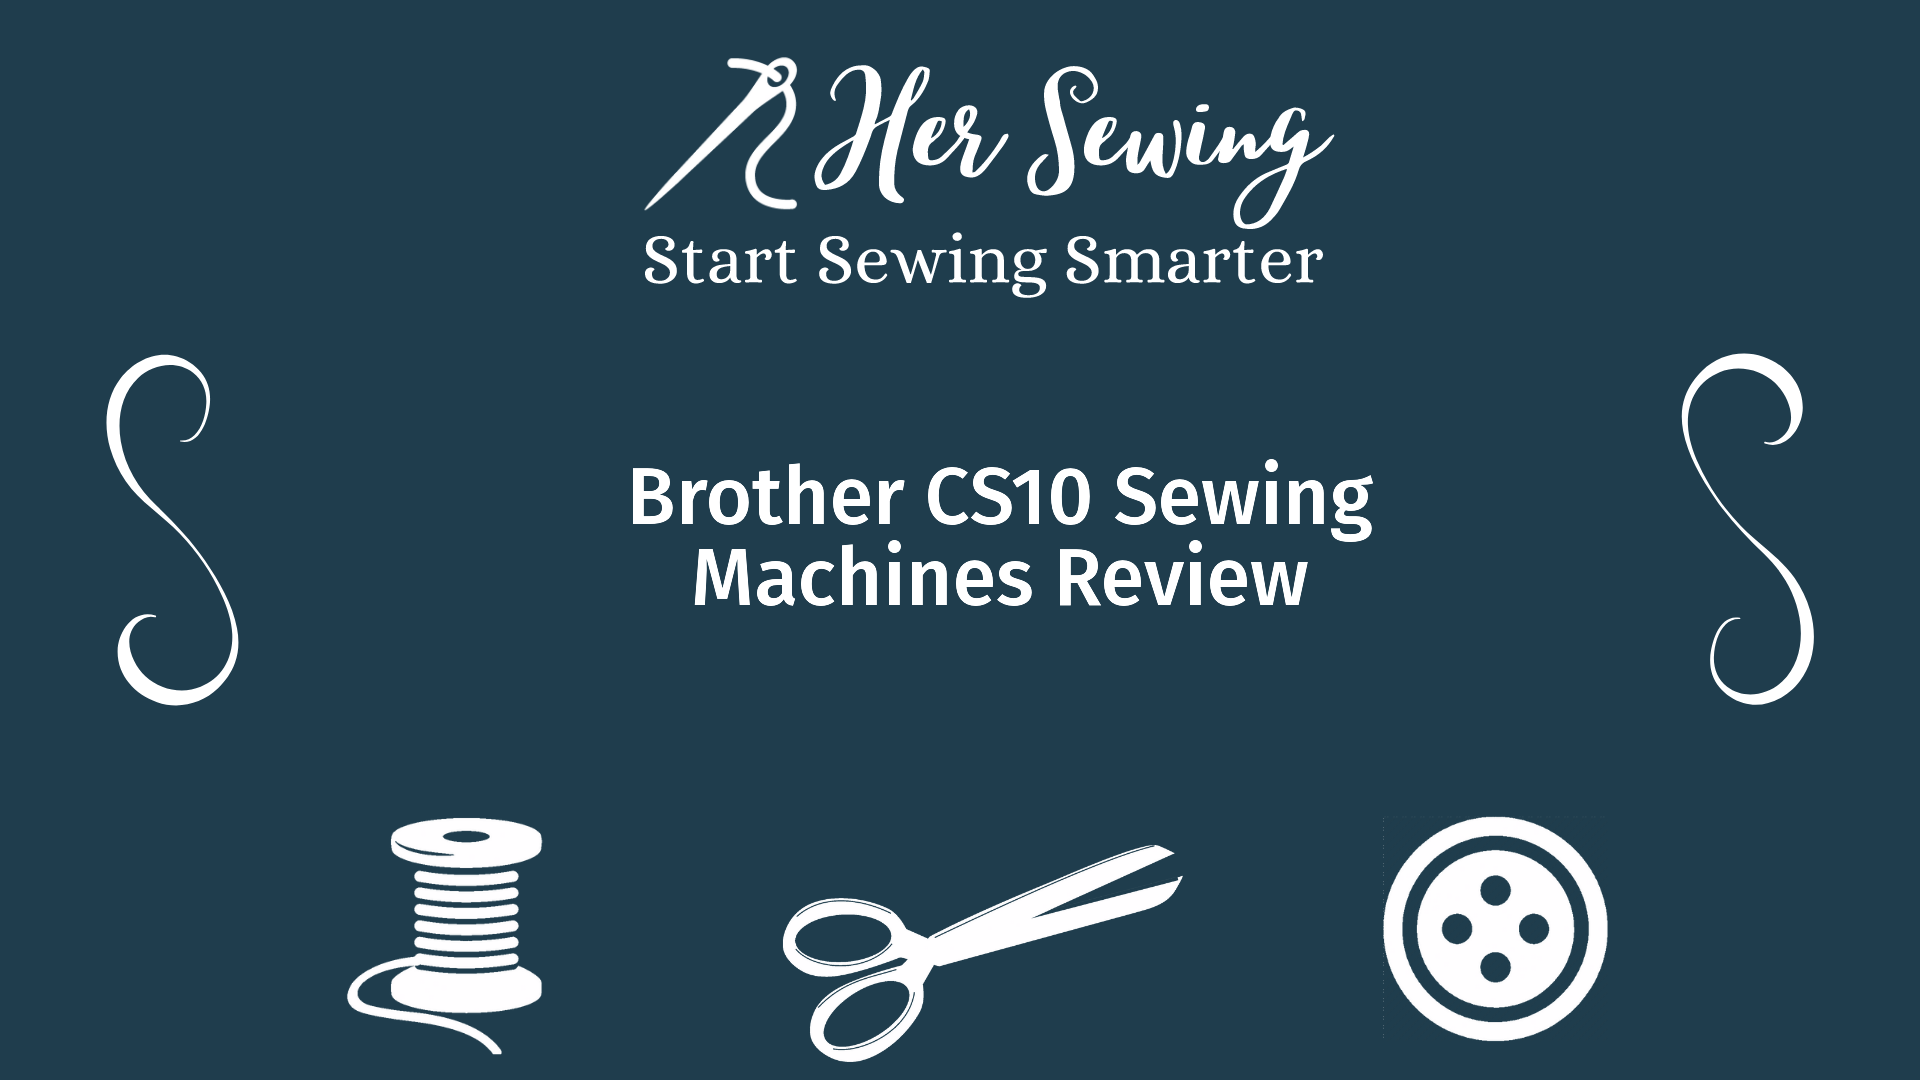 Brother CS10 Sewing Machines Review